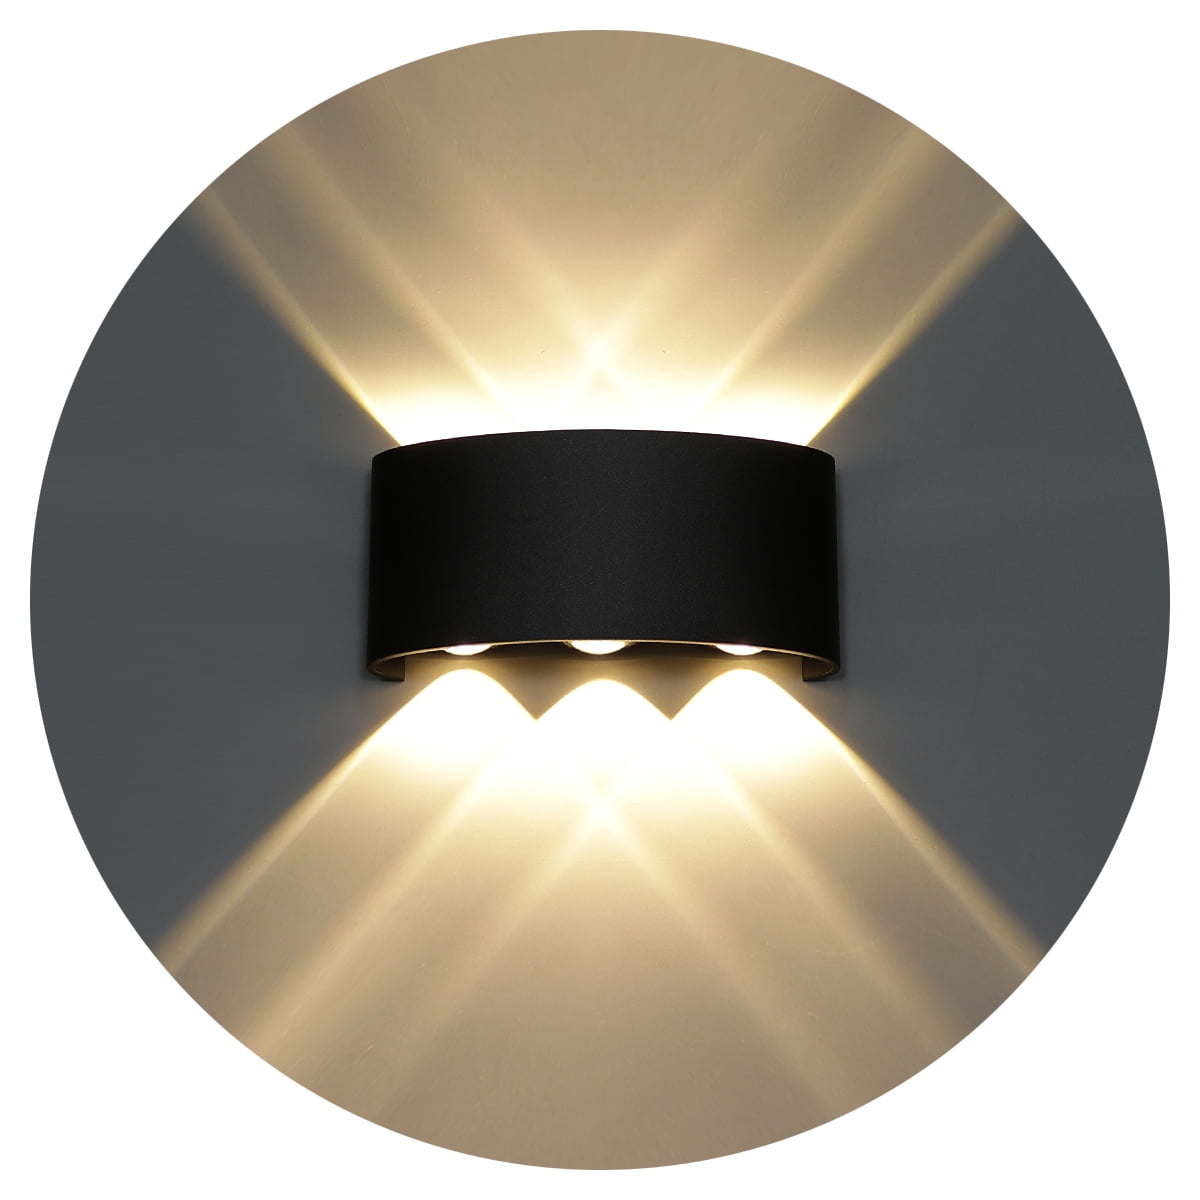 Modern LED Up Down Wall Light Sconce Outdoor Home Dual Heads Lamp Fixtures Decor 